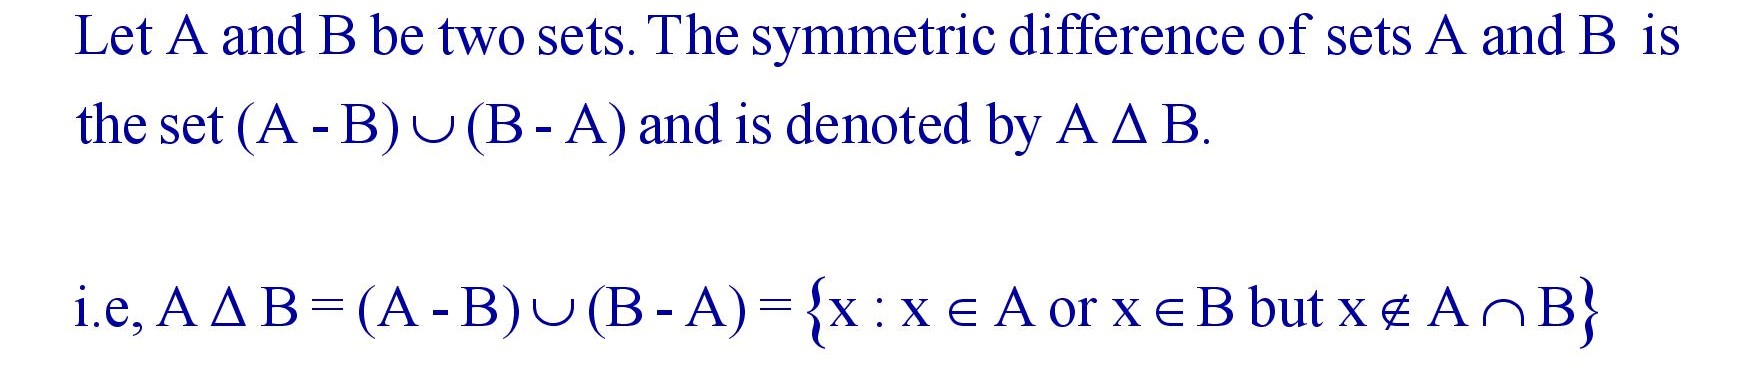 Symmetric Difference of two Sets